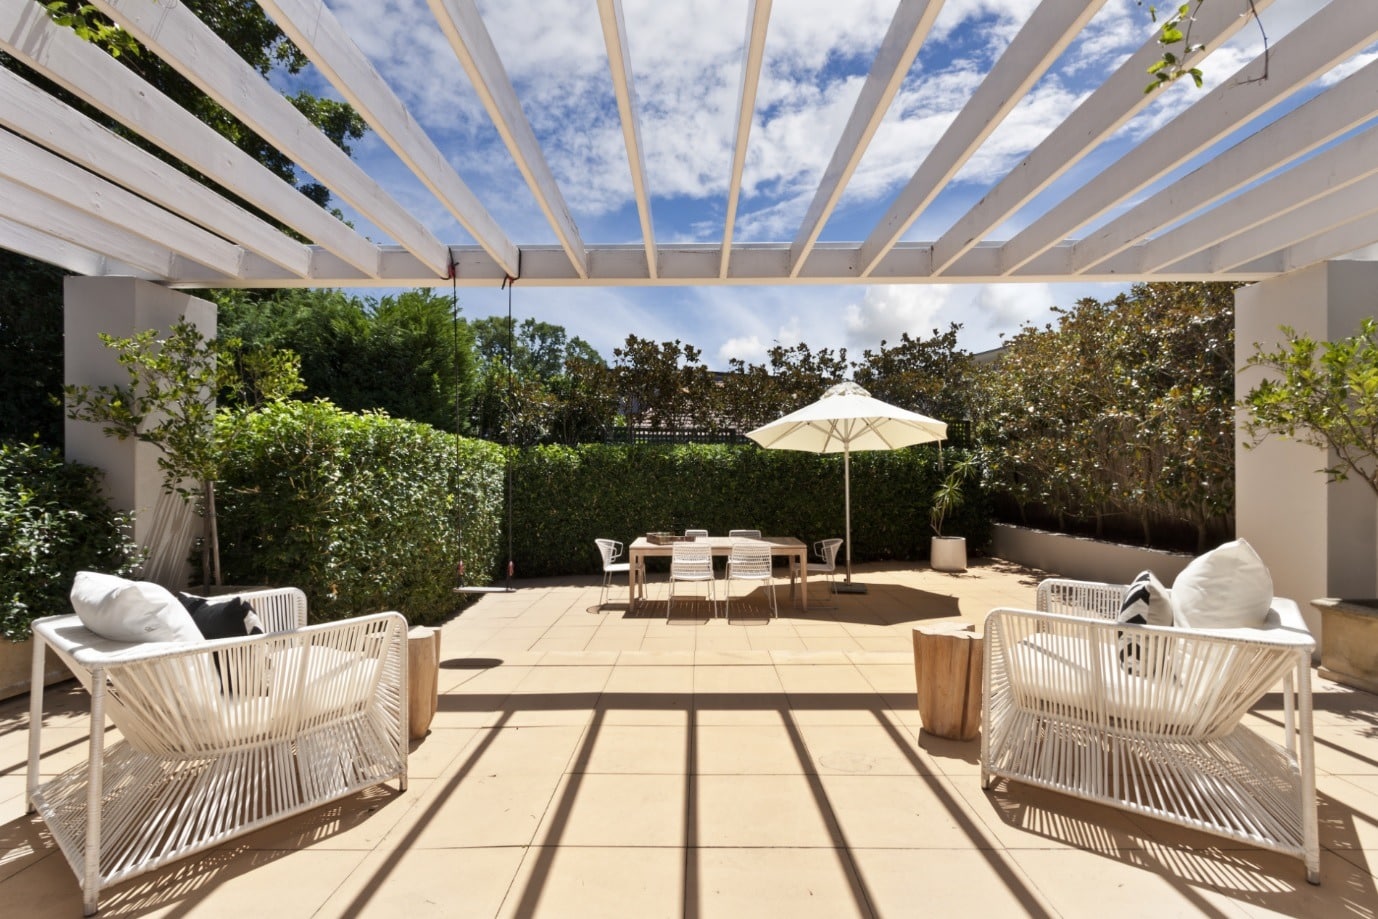 Summer Trends for Your Outdoor Space